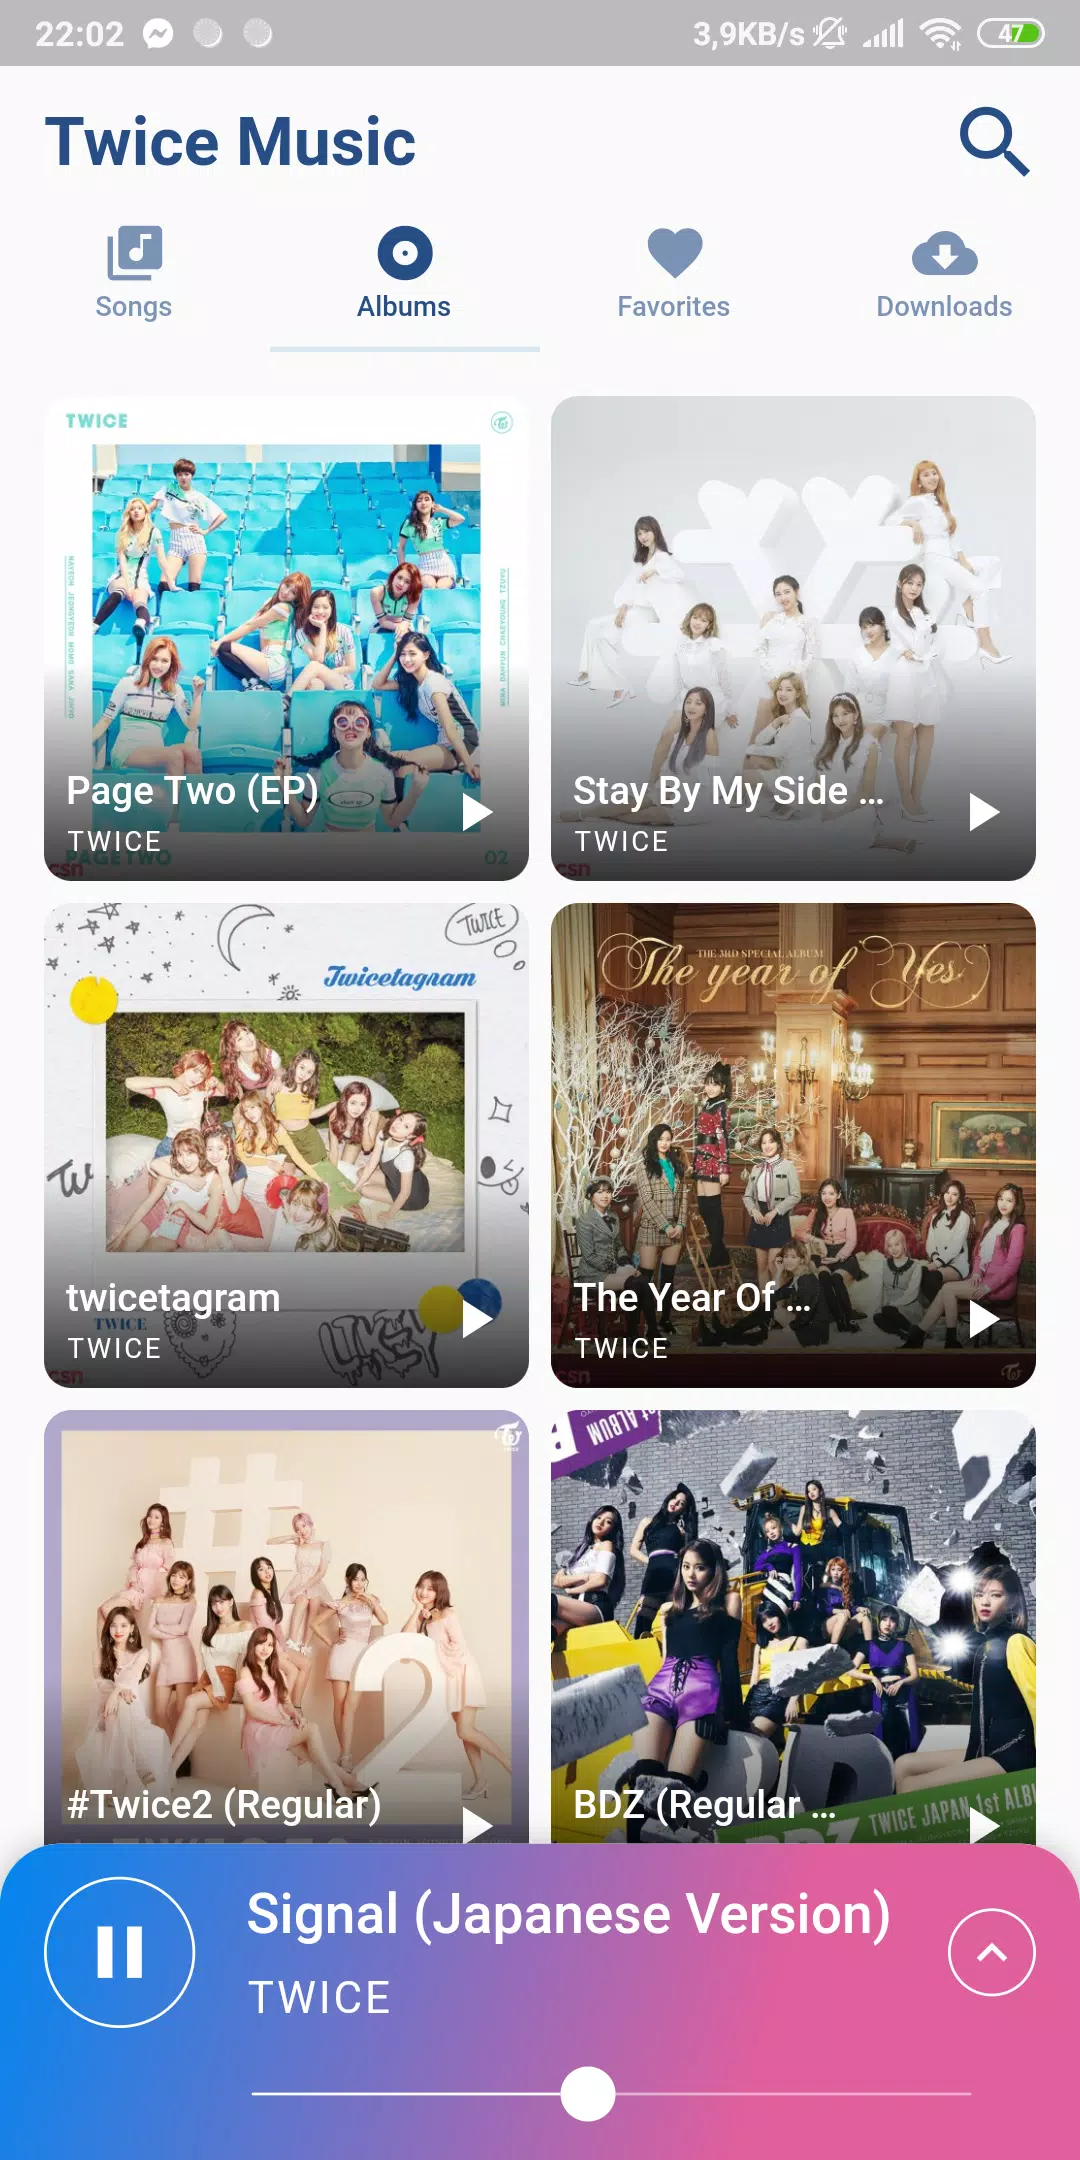 Twice Lyrics - Kpop Music Song 2019 APK for Android Download